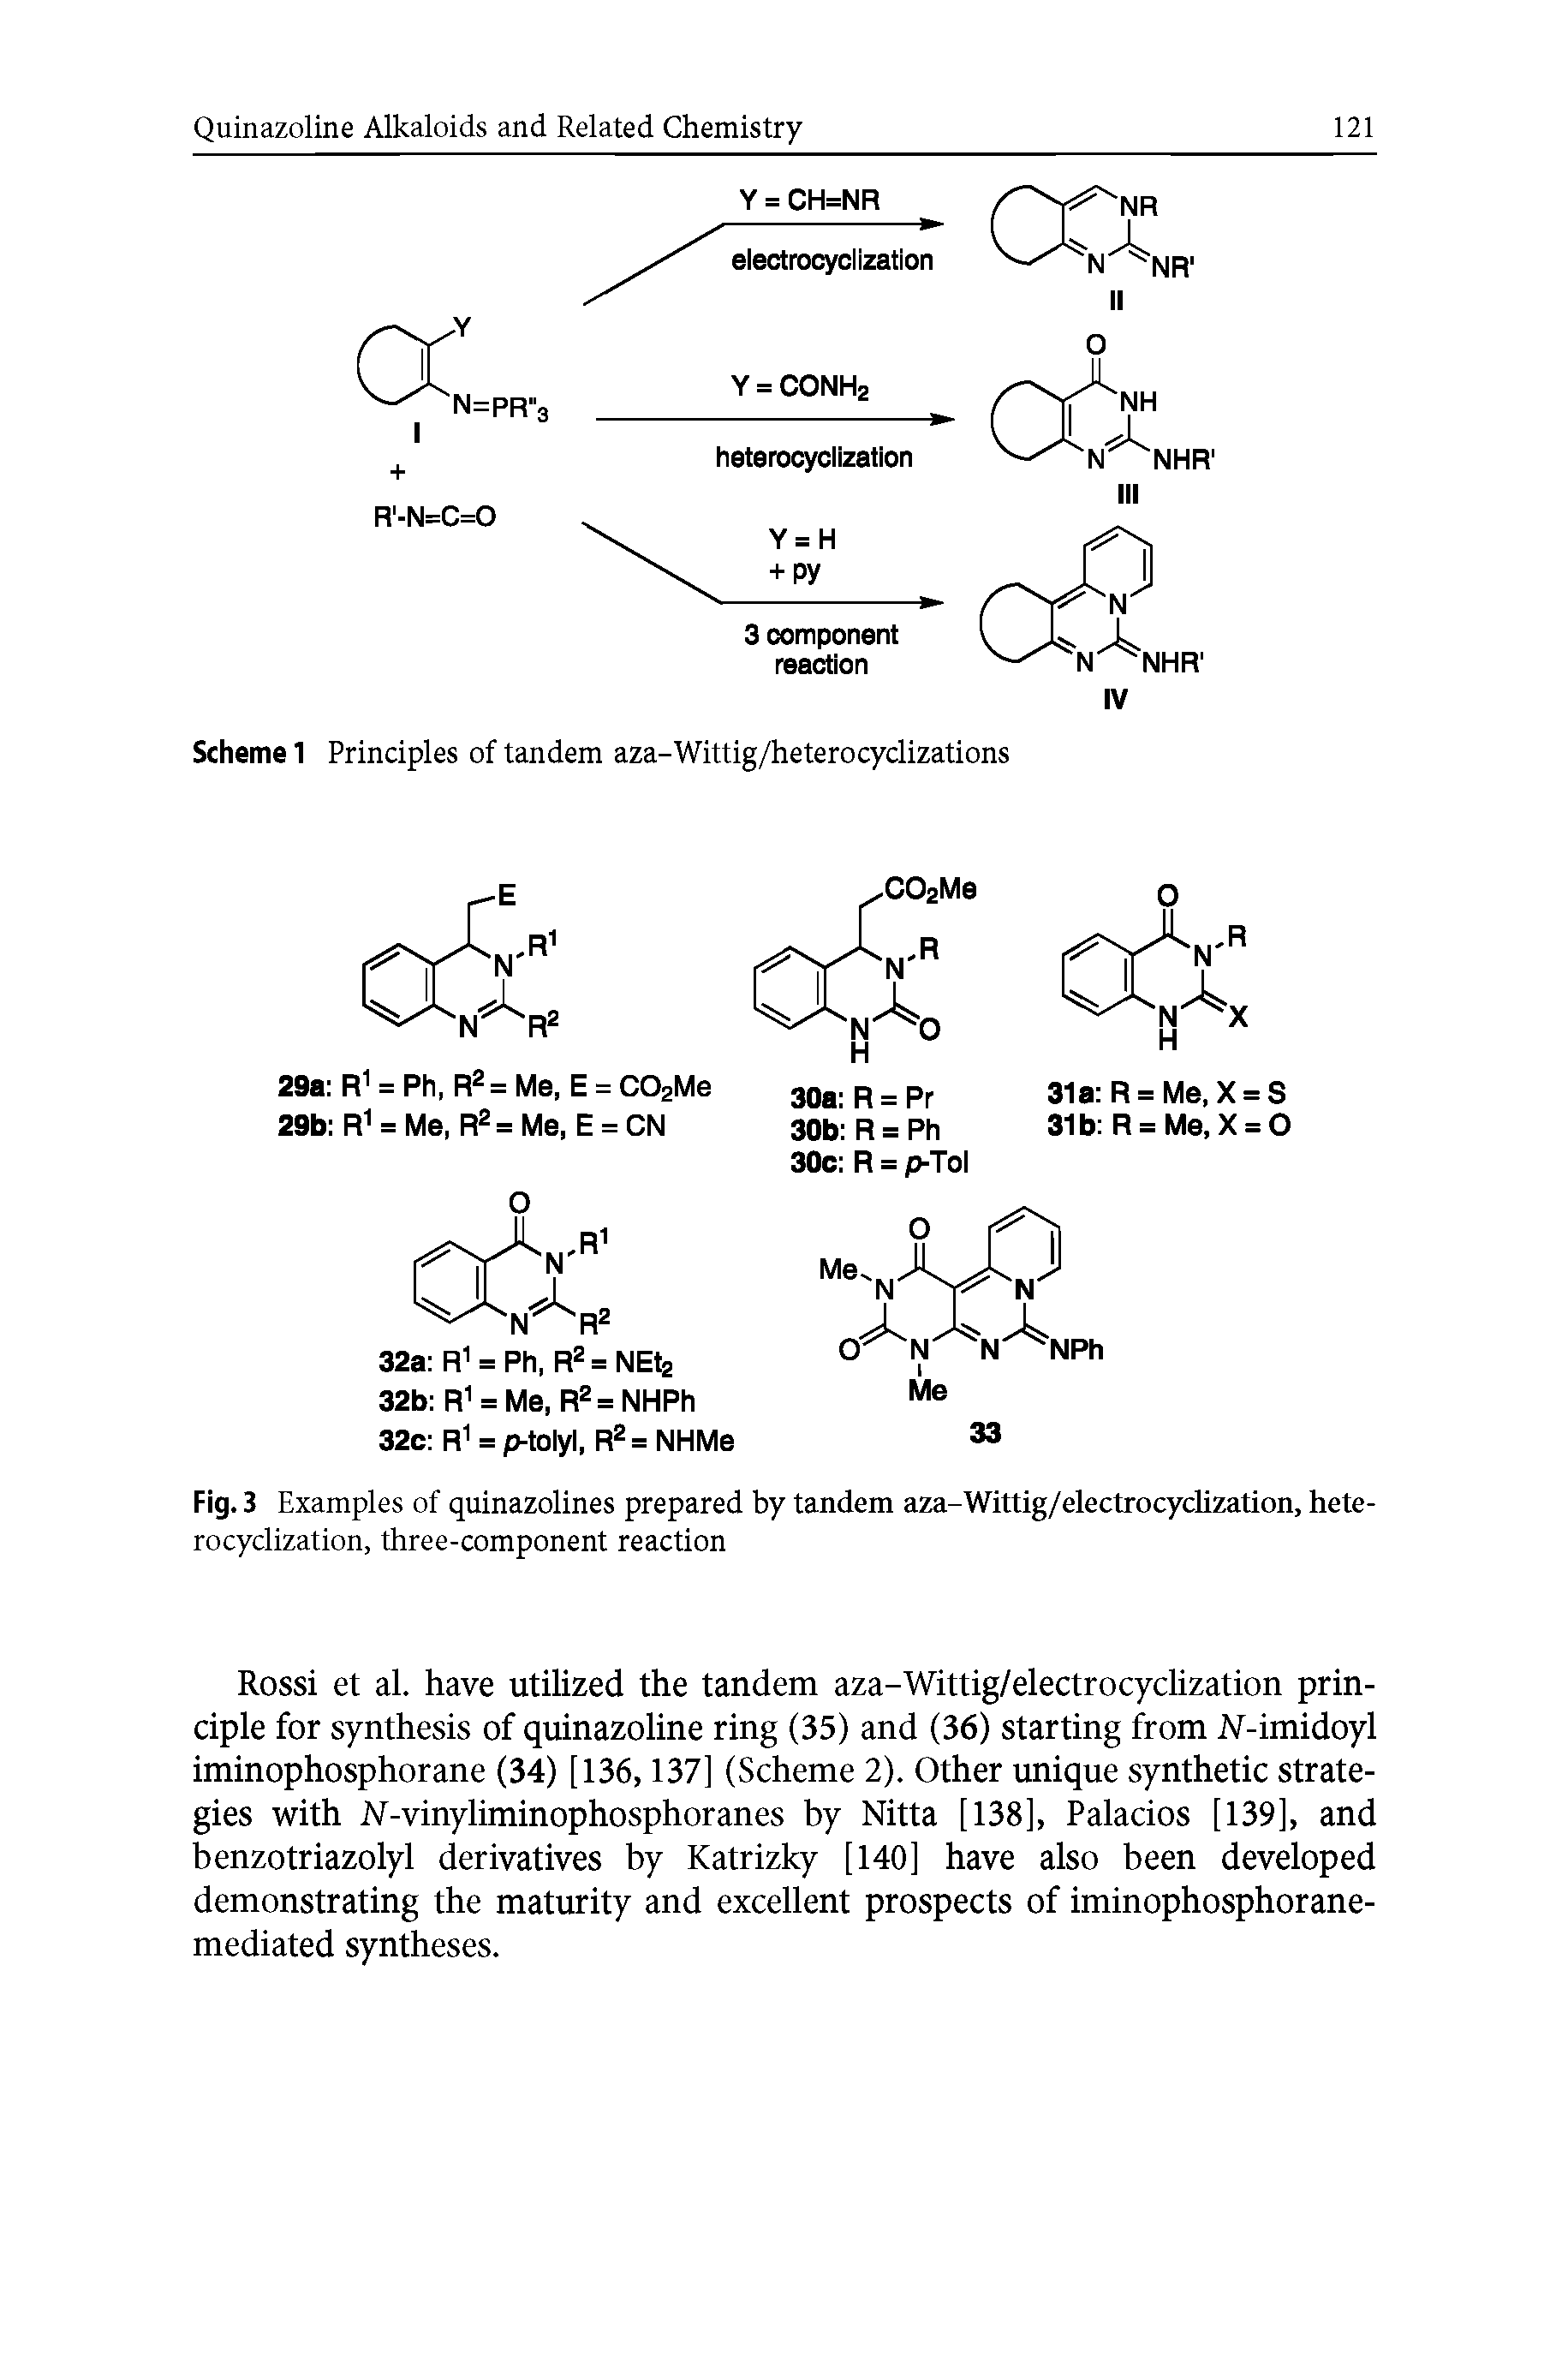 Fig. 3 Examples of quinazolines prepared by tandem aza-Wittig/electrocyclization, heterocyclization, three-component reaction...